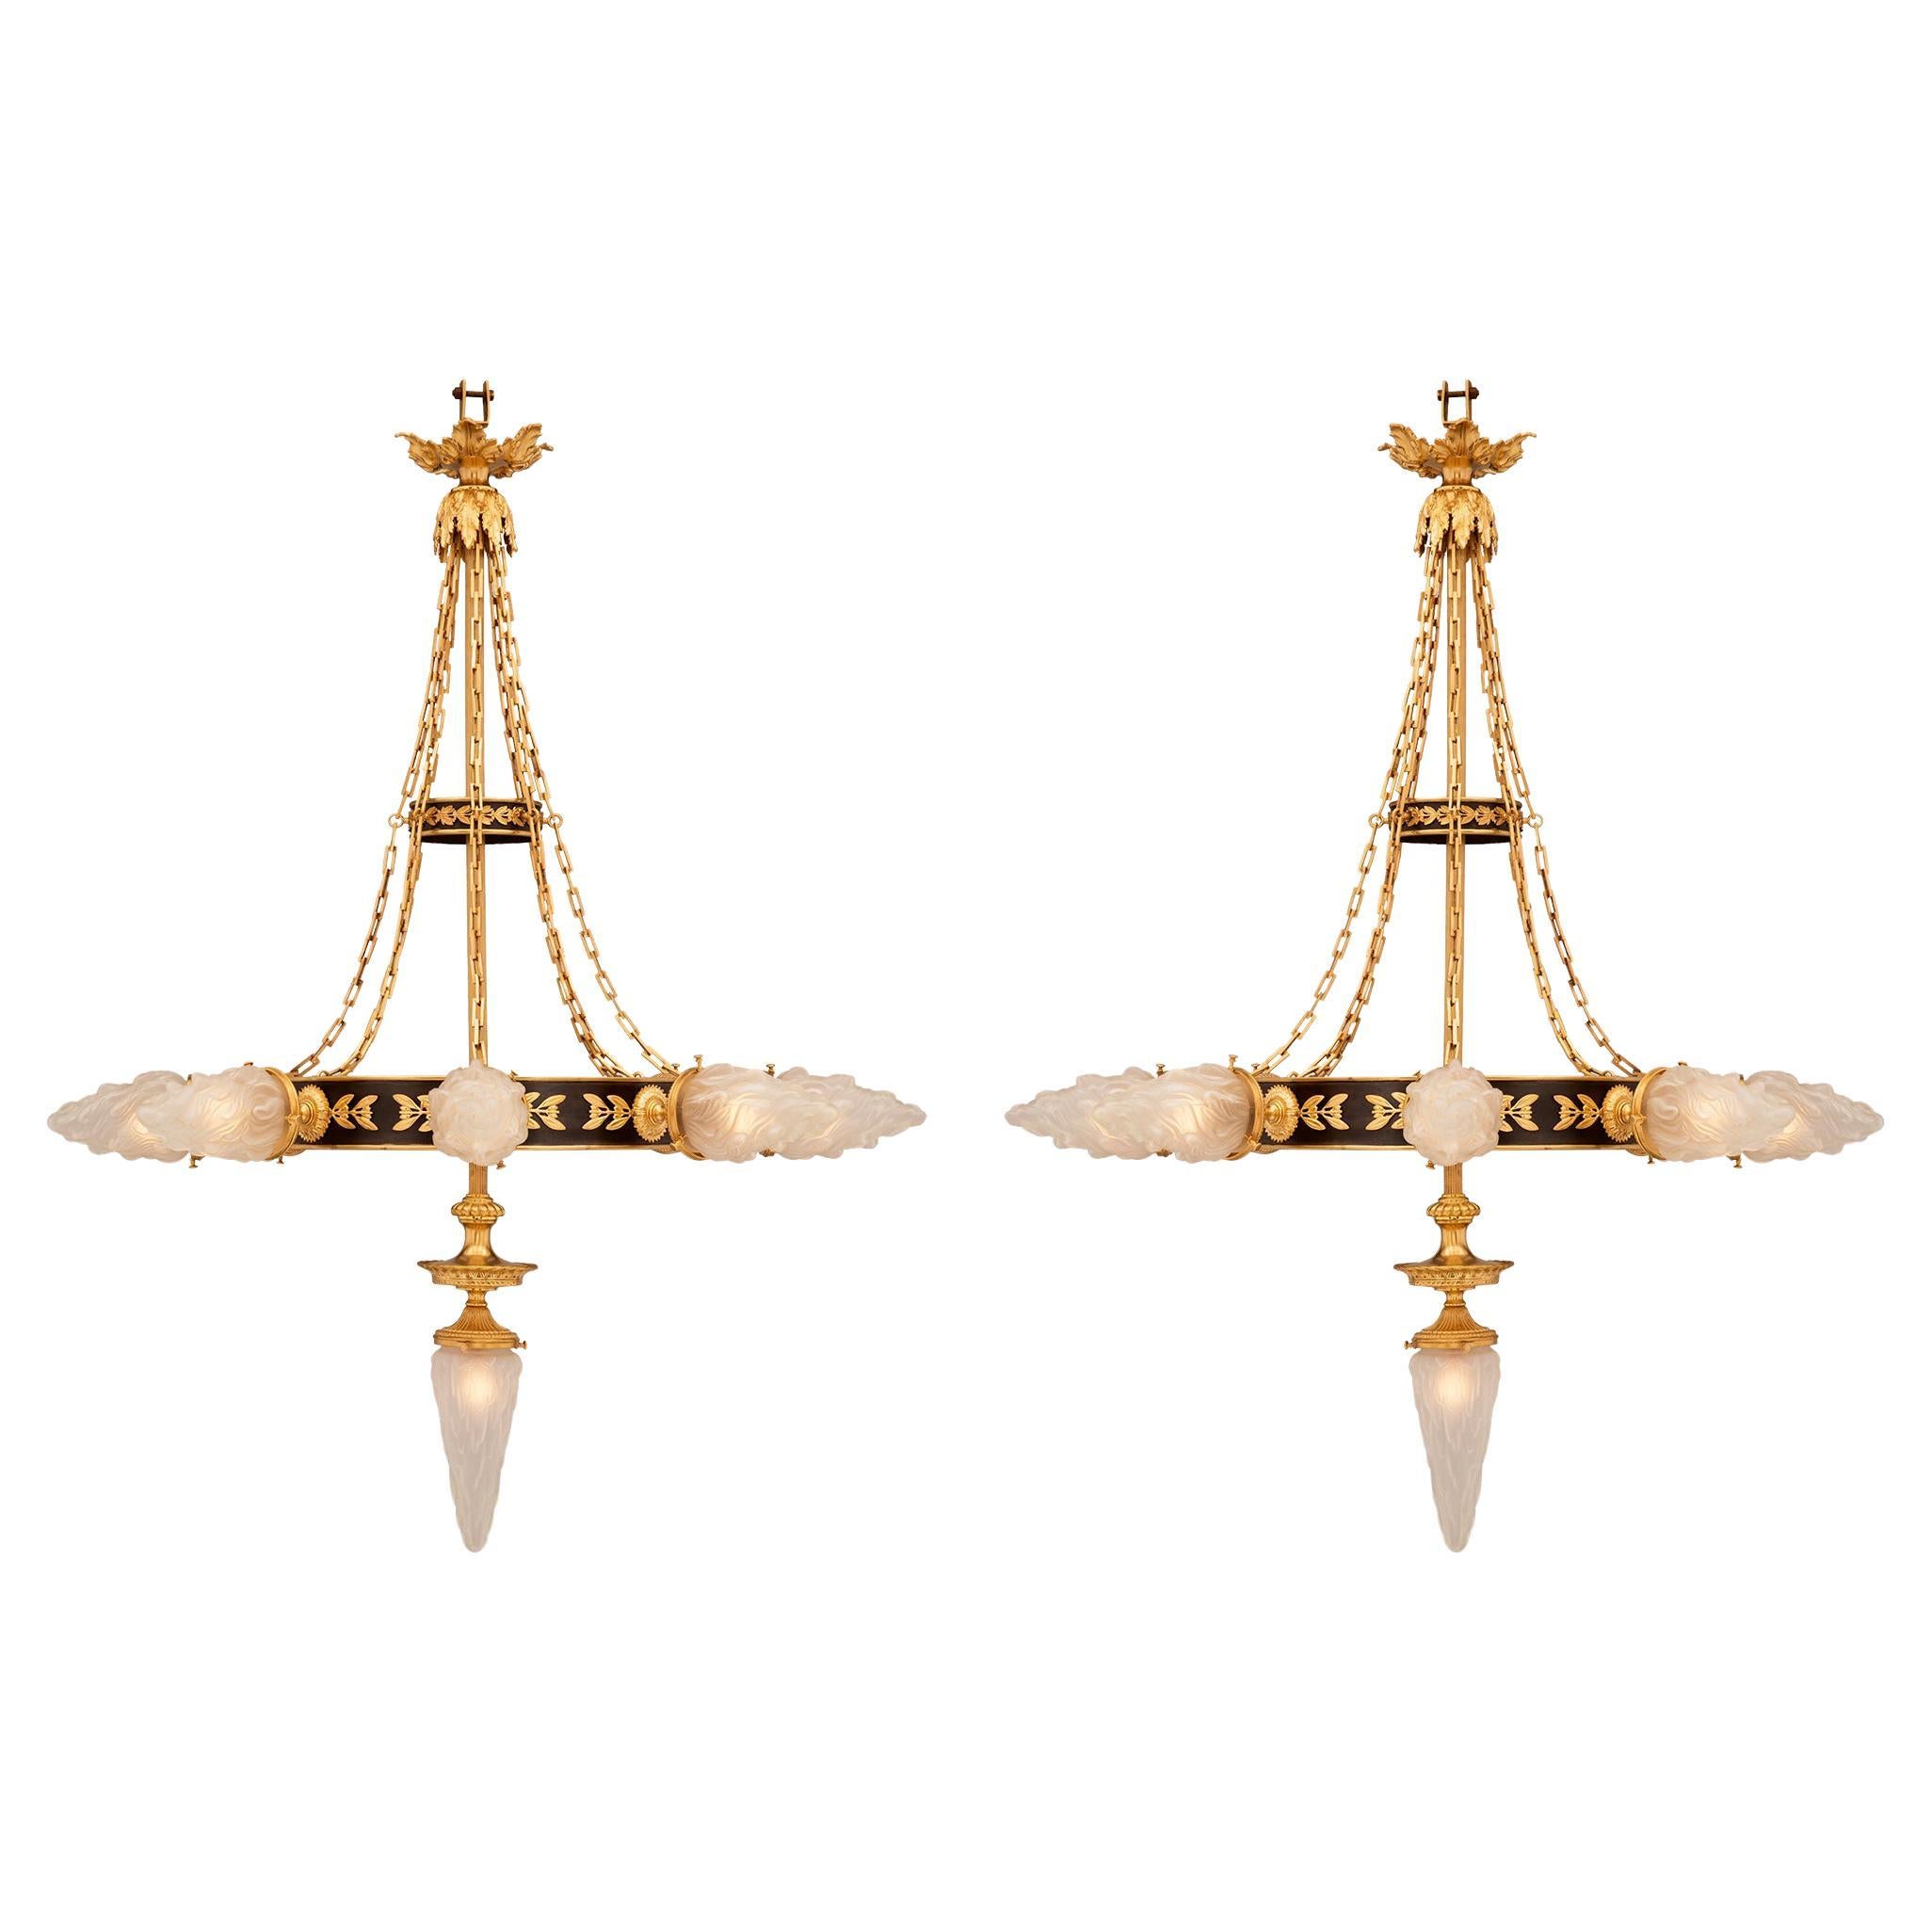 Pair of French 19th Century Neoclassical Bronze, Ormolu and Glass Chandeliers